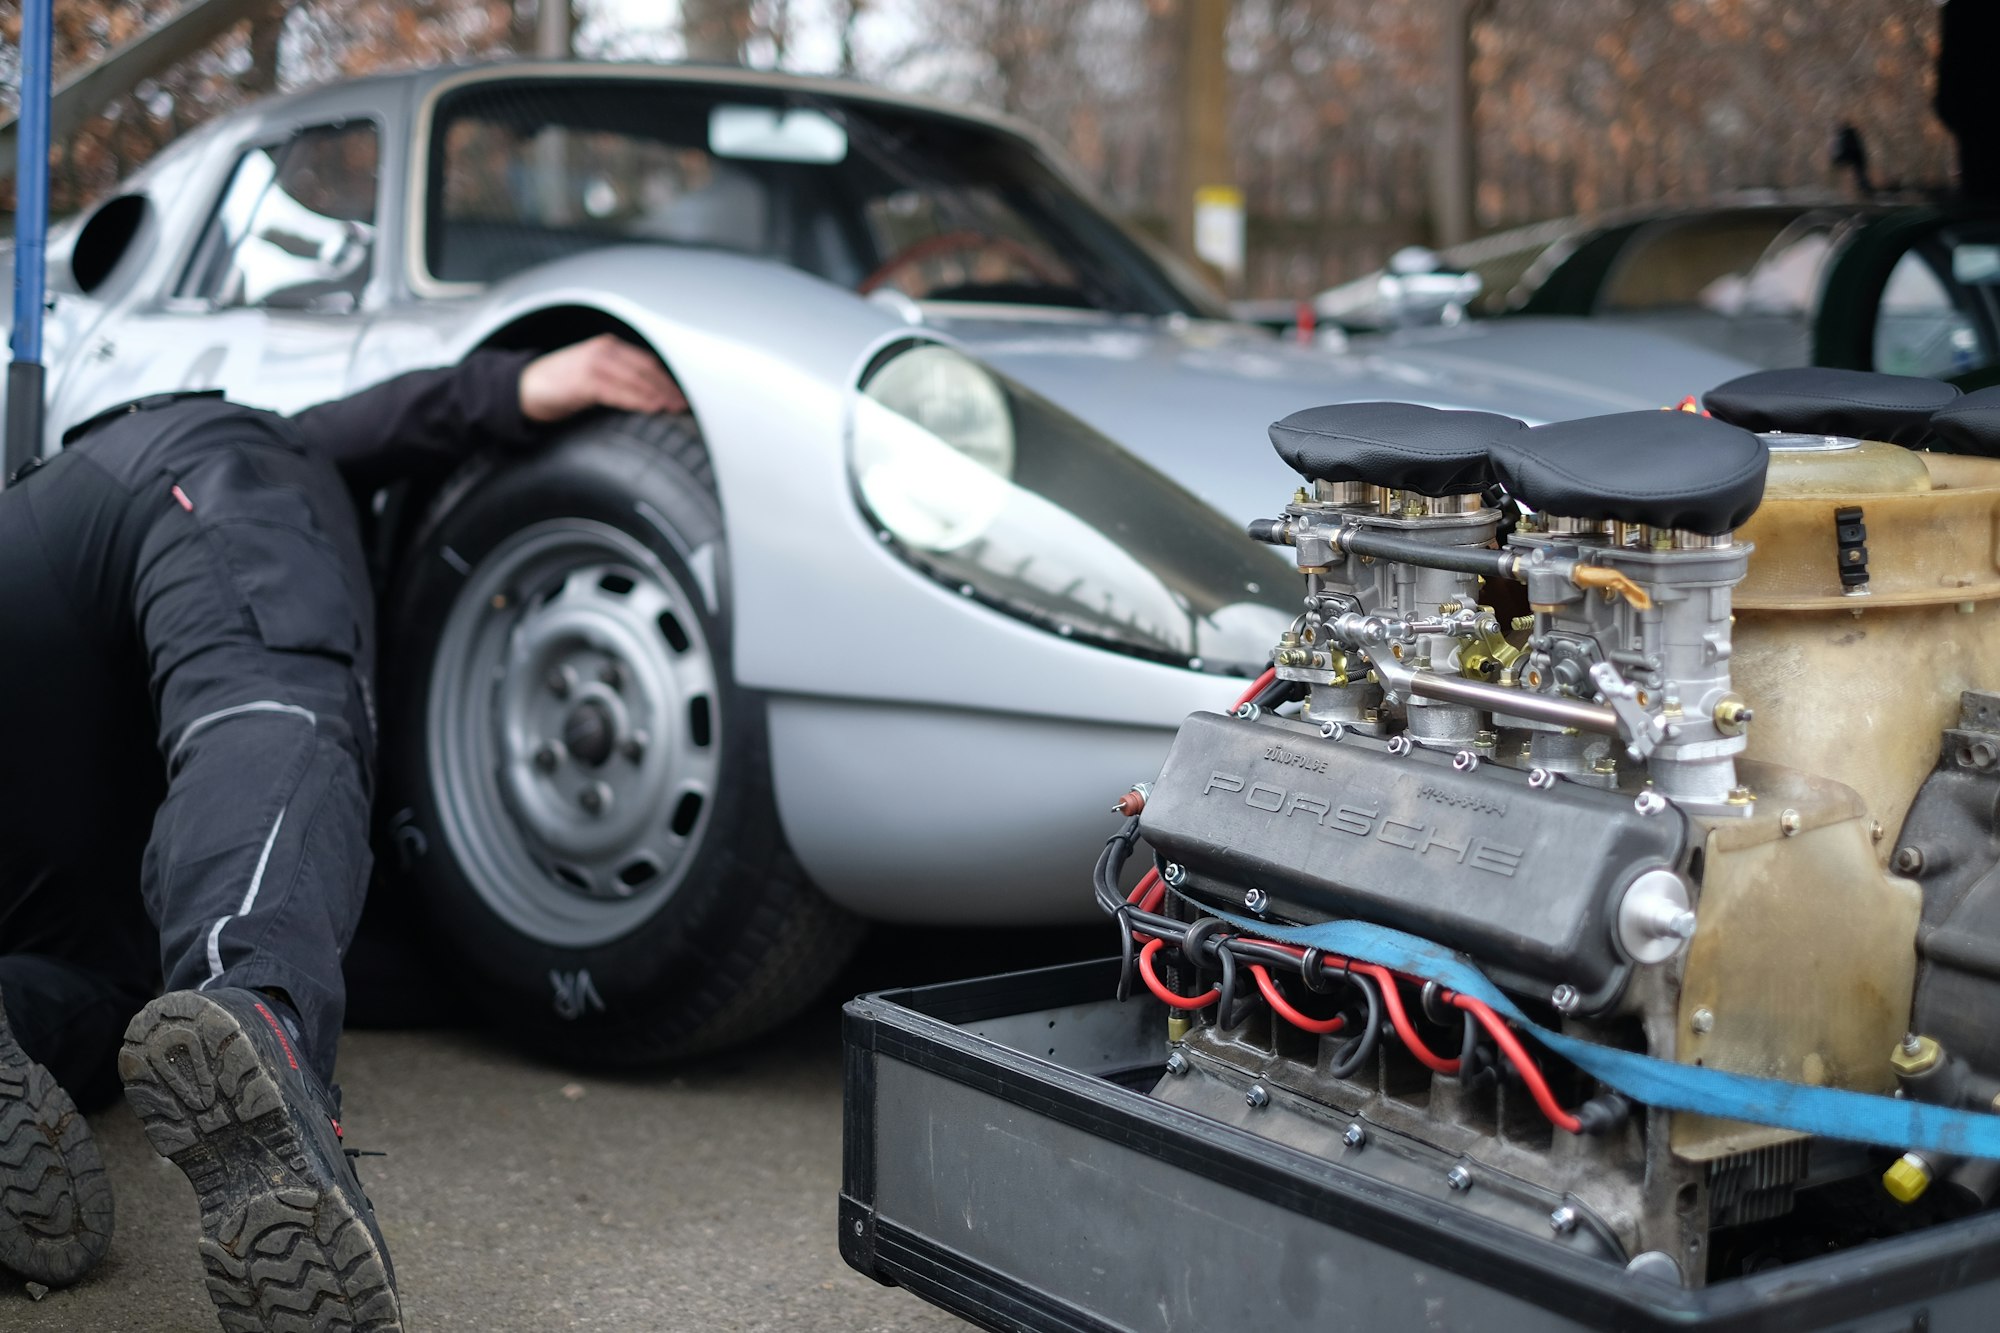 Taken at the 76th Goodwood Members’ Meeting at Goodwood Motor Circuit in Chichester, England. This photograph shows a preoccupied mechanic behind a selectively focused engine that was destined for this Porsche race car.